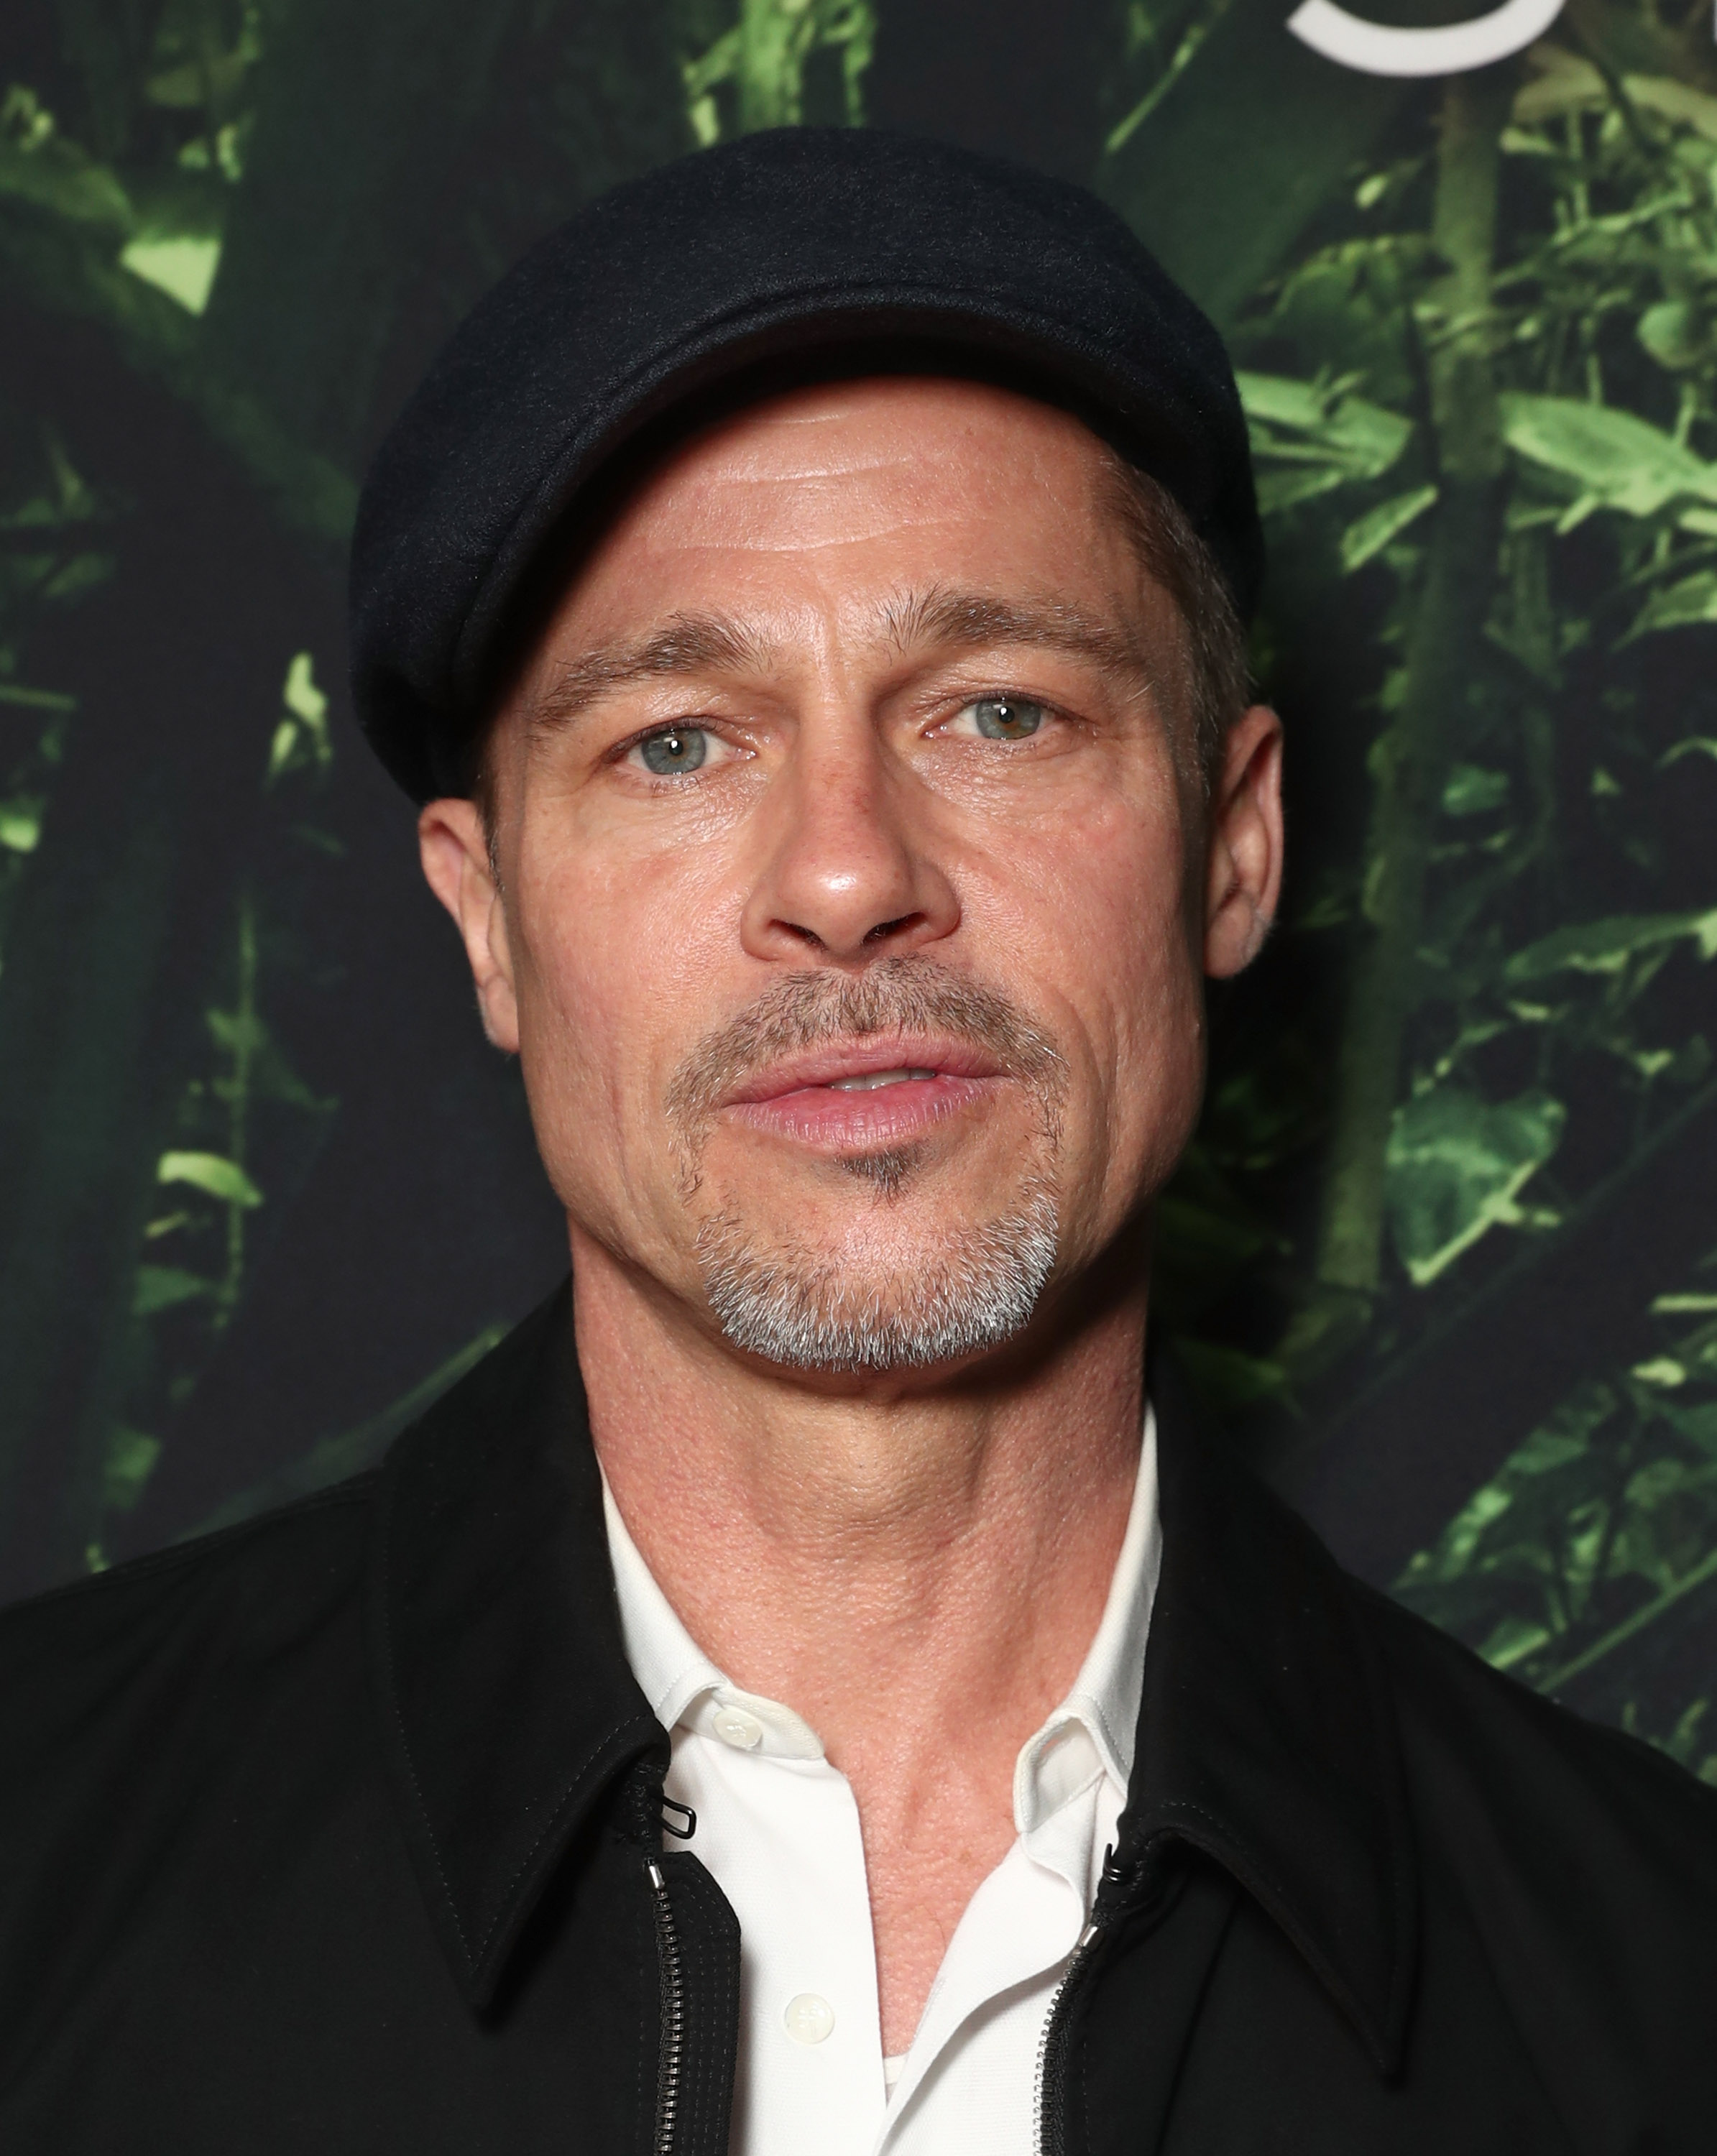 Brad Pitt attends the Los Angeles premiere of The Lost City if Z," 2017 | Source: Getty Images